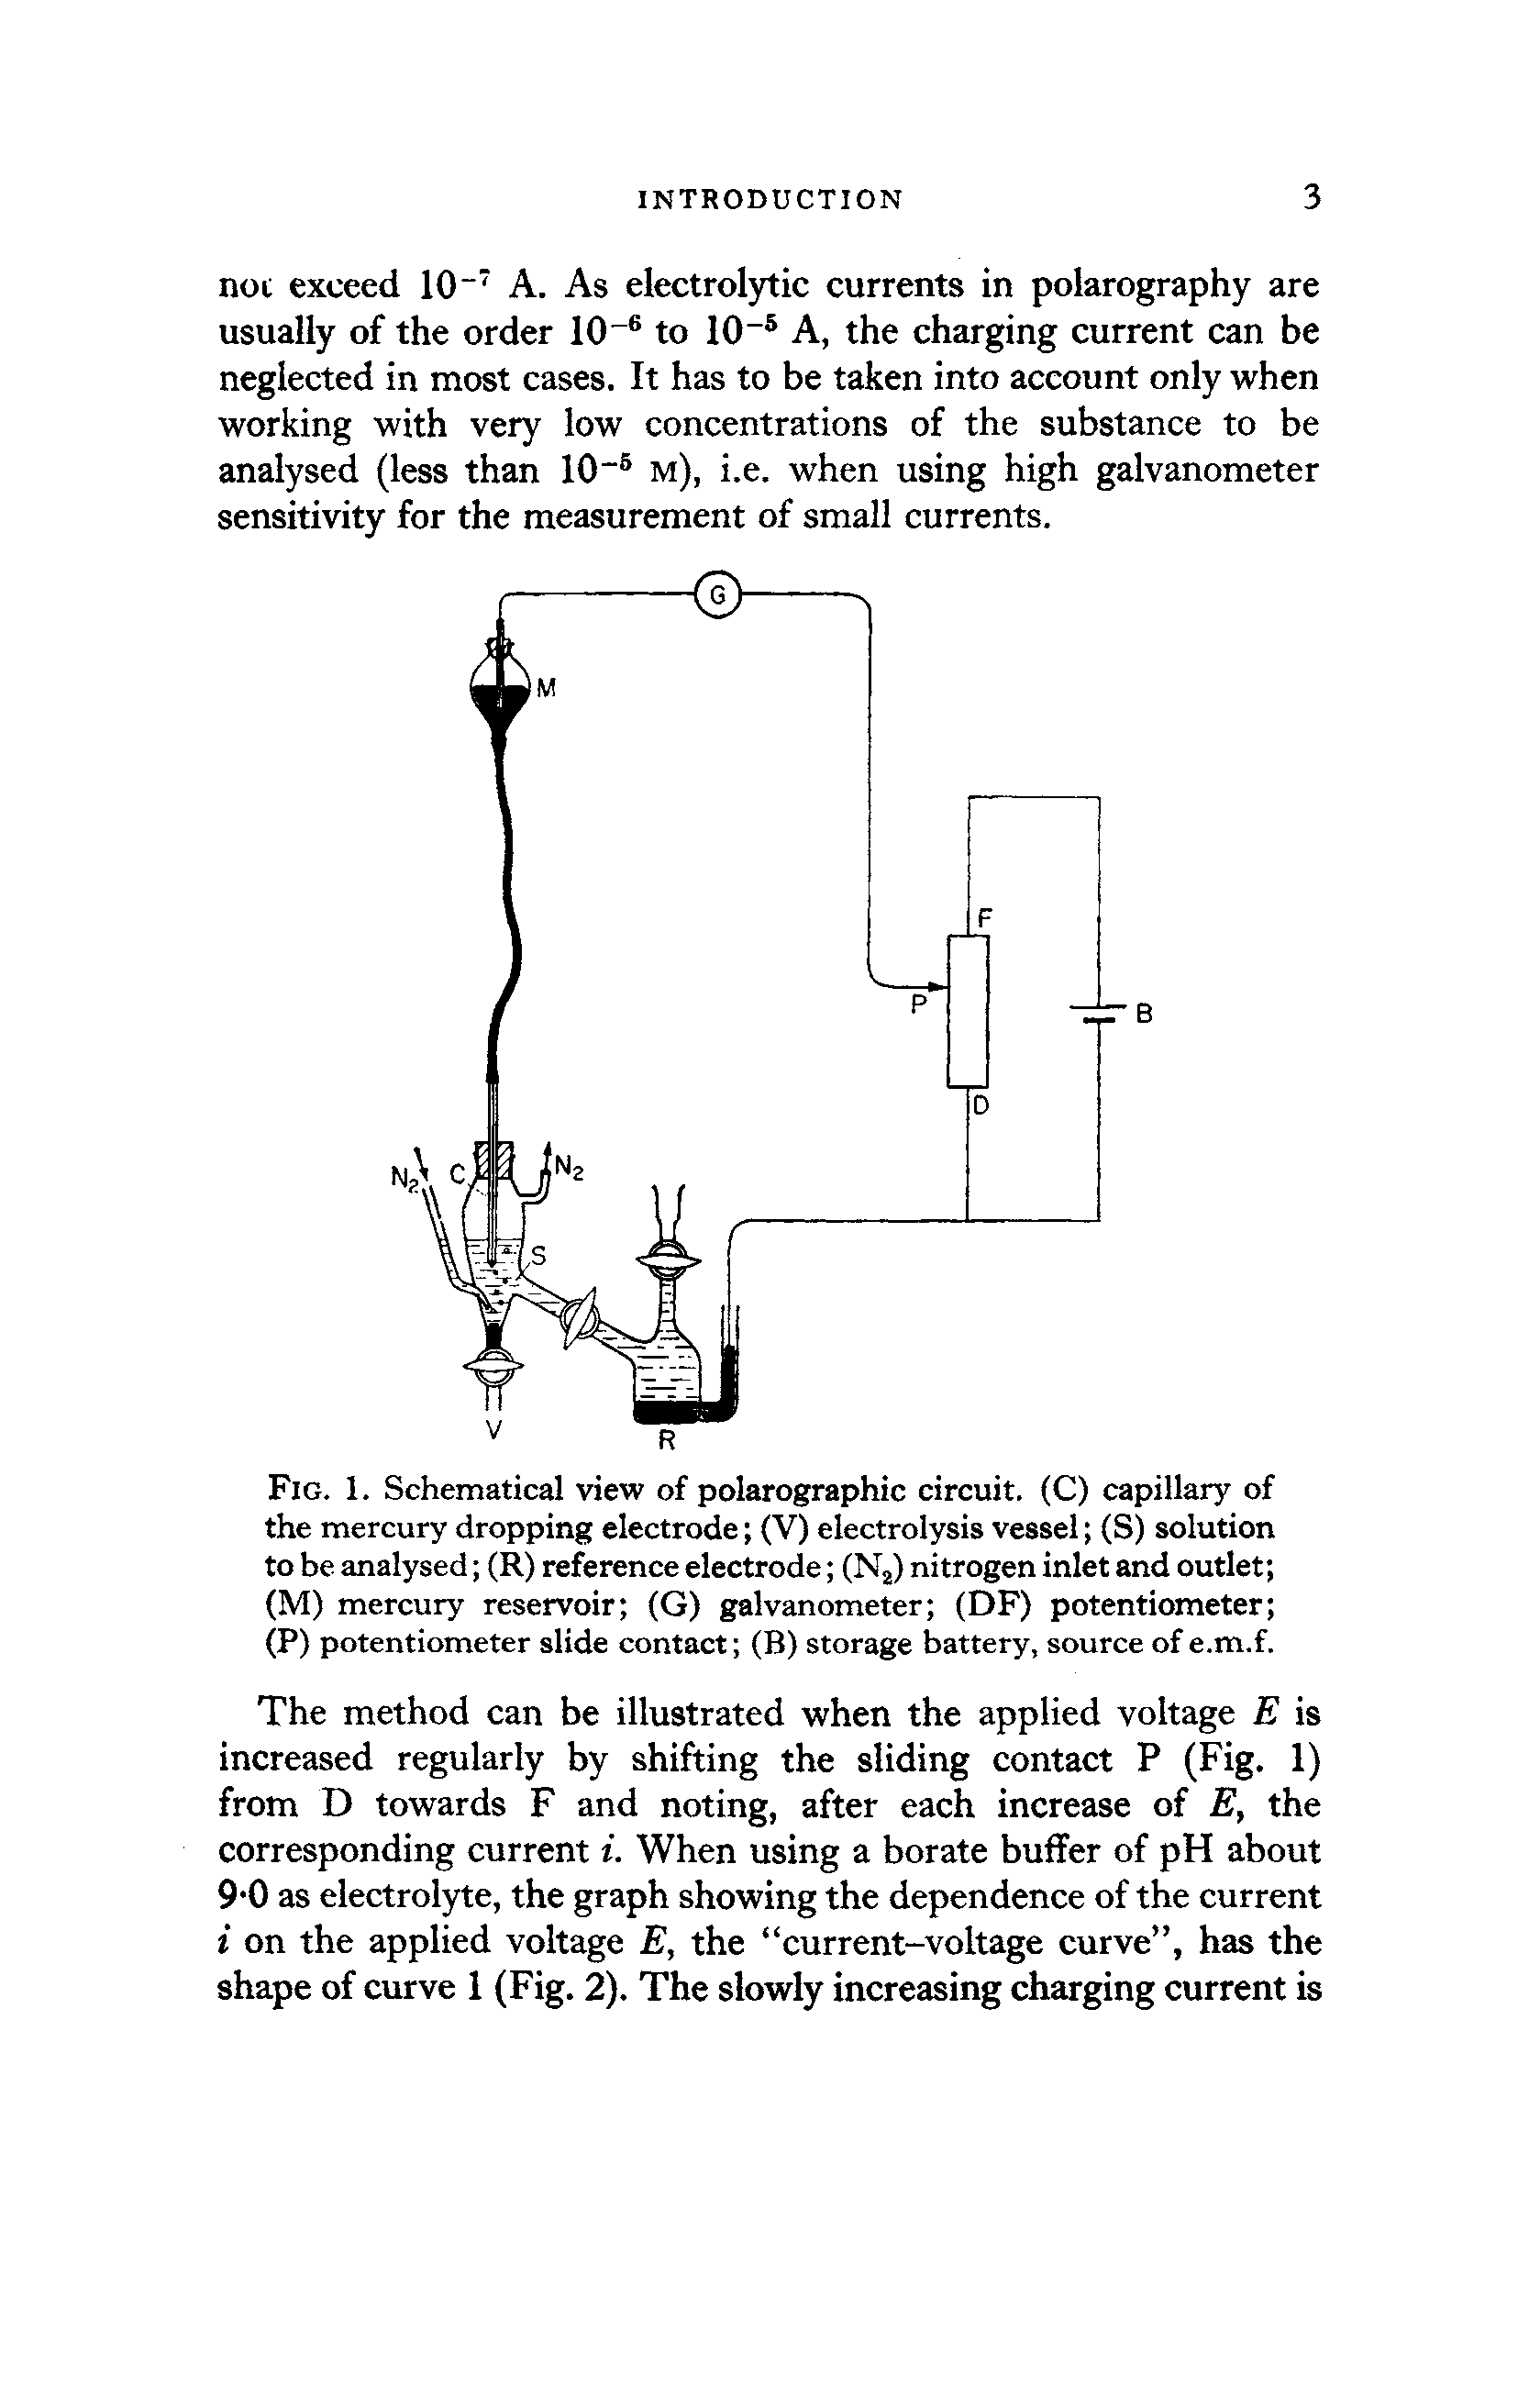 Fig. 1. Schematical view of polarographic circuit. (C) capillary of the mercury dropping electrode (V) electrolysis vessel (S) solution to be analysed (R) reference electrode (Nj) nitrogen inlet and outlet (M) mercury reservoir (G) galvanometer (DF) potentiometer ...